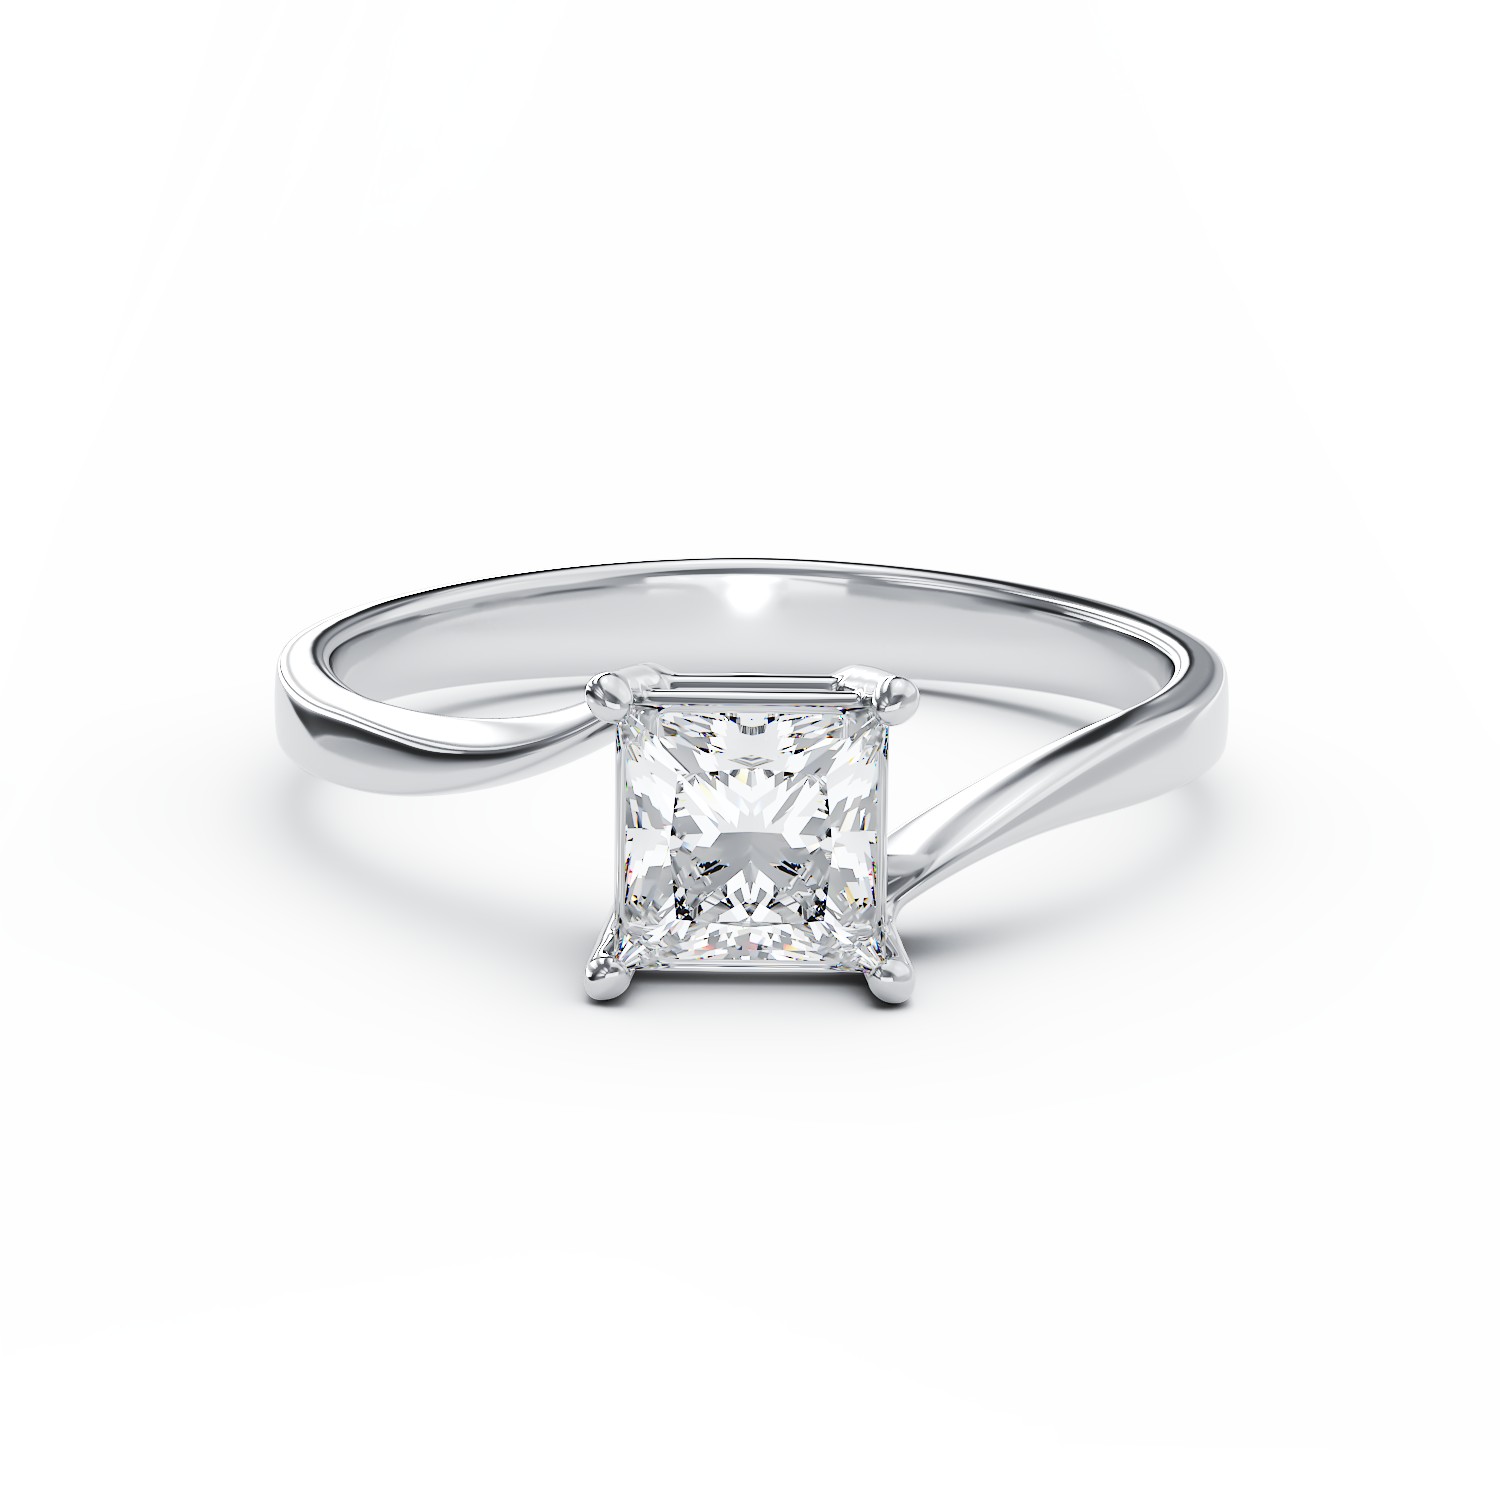 18K white gold engagement ring with a 0.7ct solitaire diamond